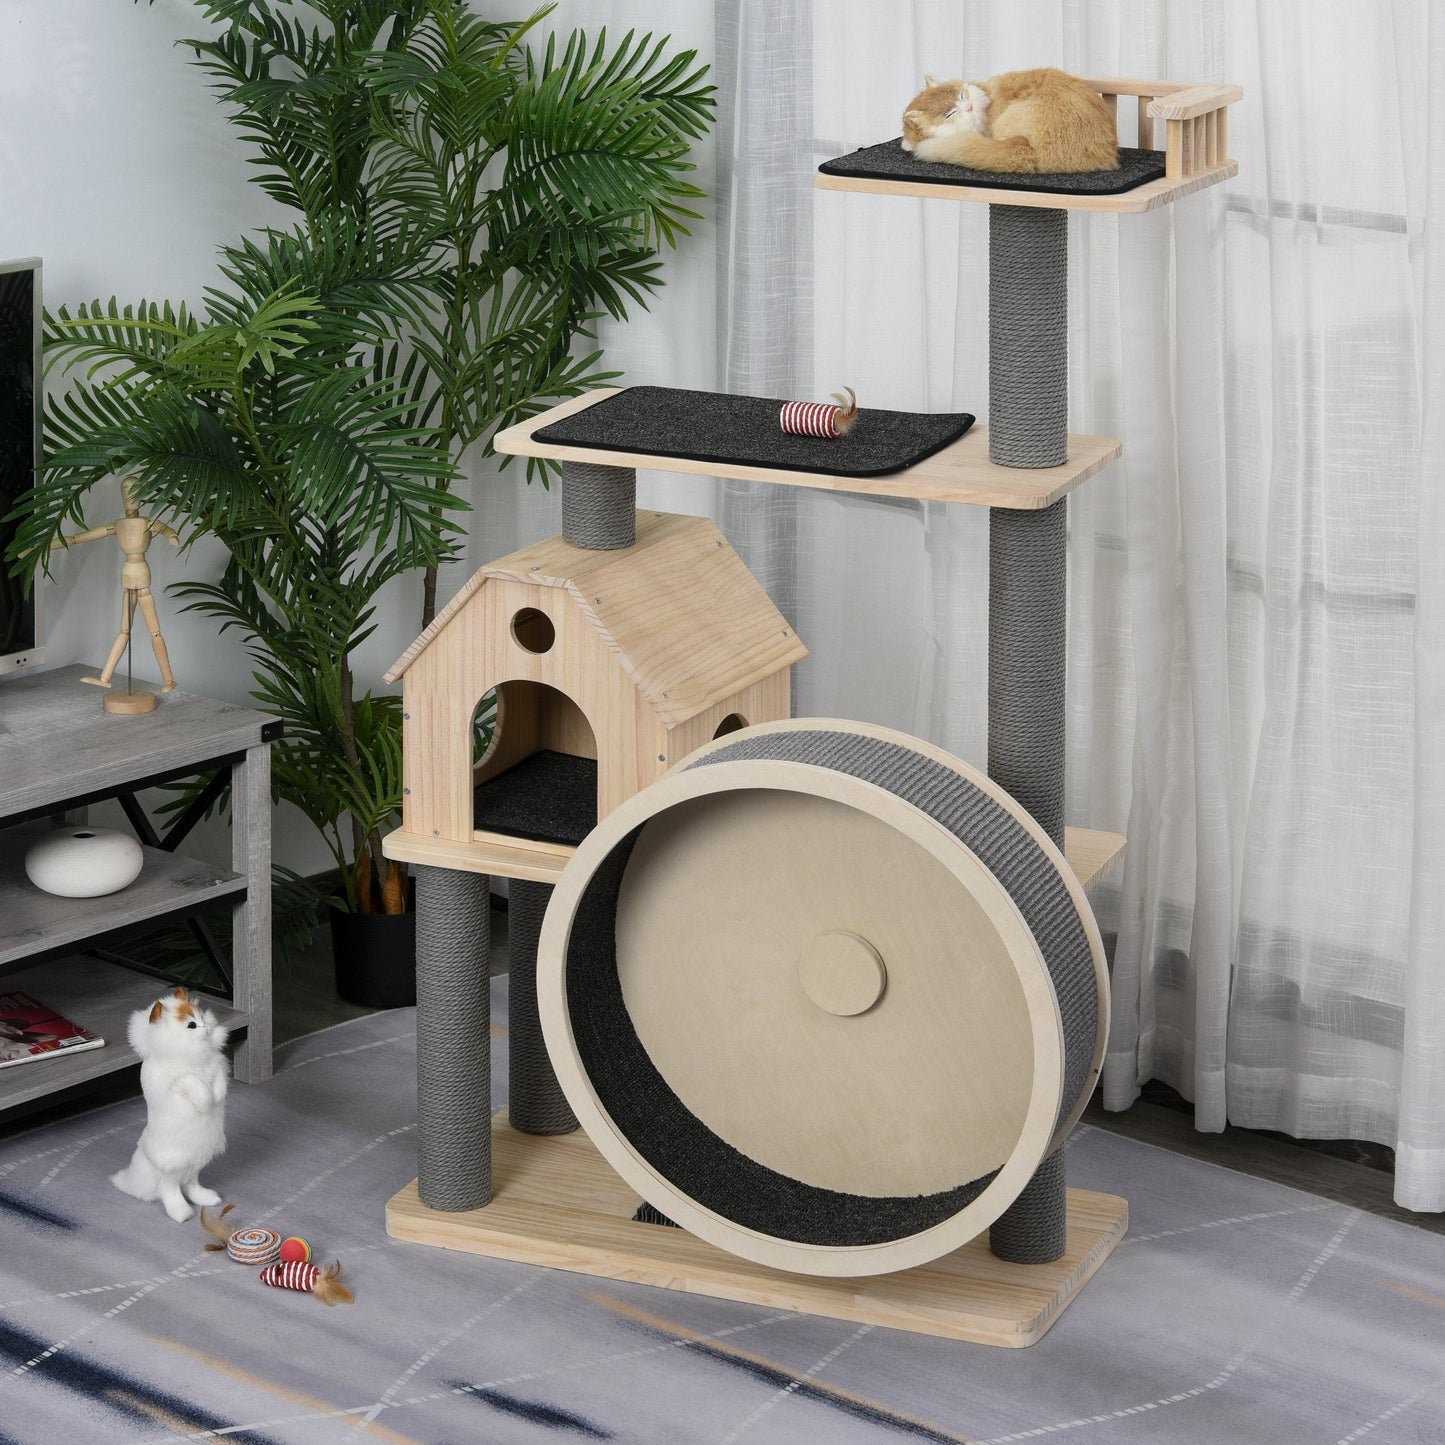 -PawHut 58.25" Luxury Pine Wood Cat Tree Activity Center with Sisal Scratching Posts Board Perches Roomy Condo Carpet Cushion Rotating Runner Natural - Outdoor Style Company